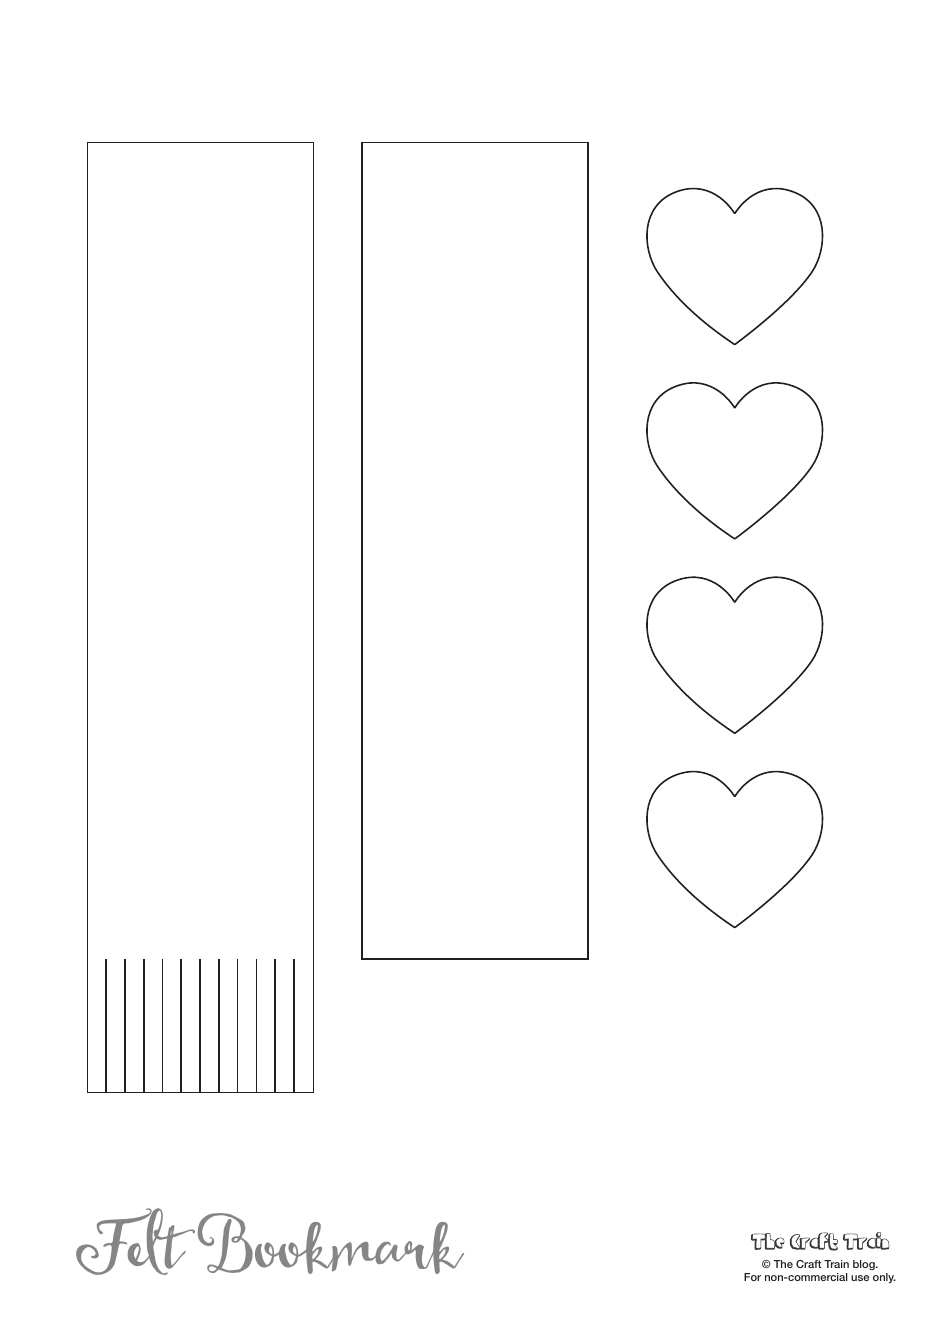 Bookmark with hearts template